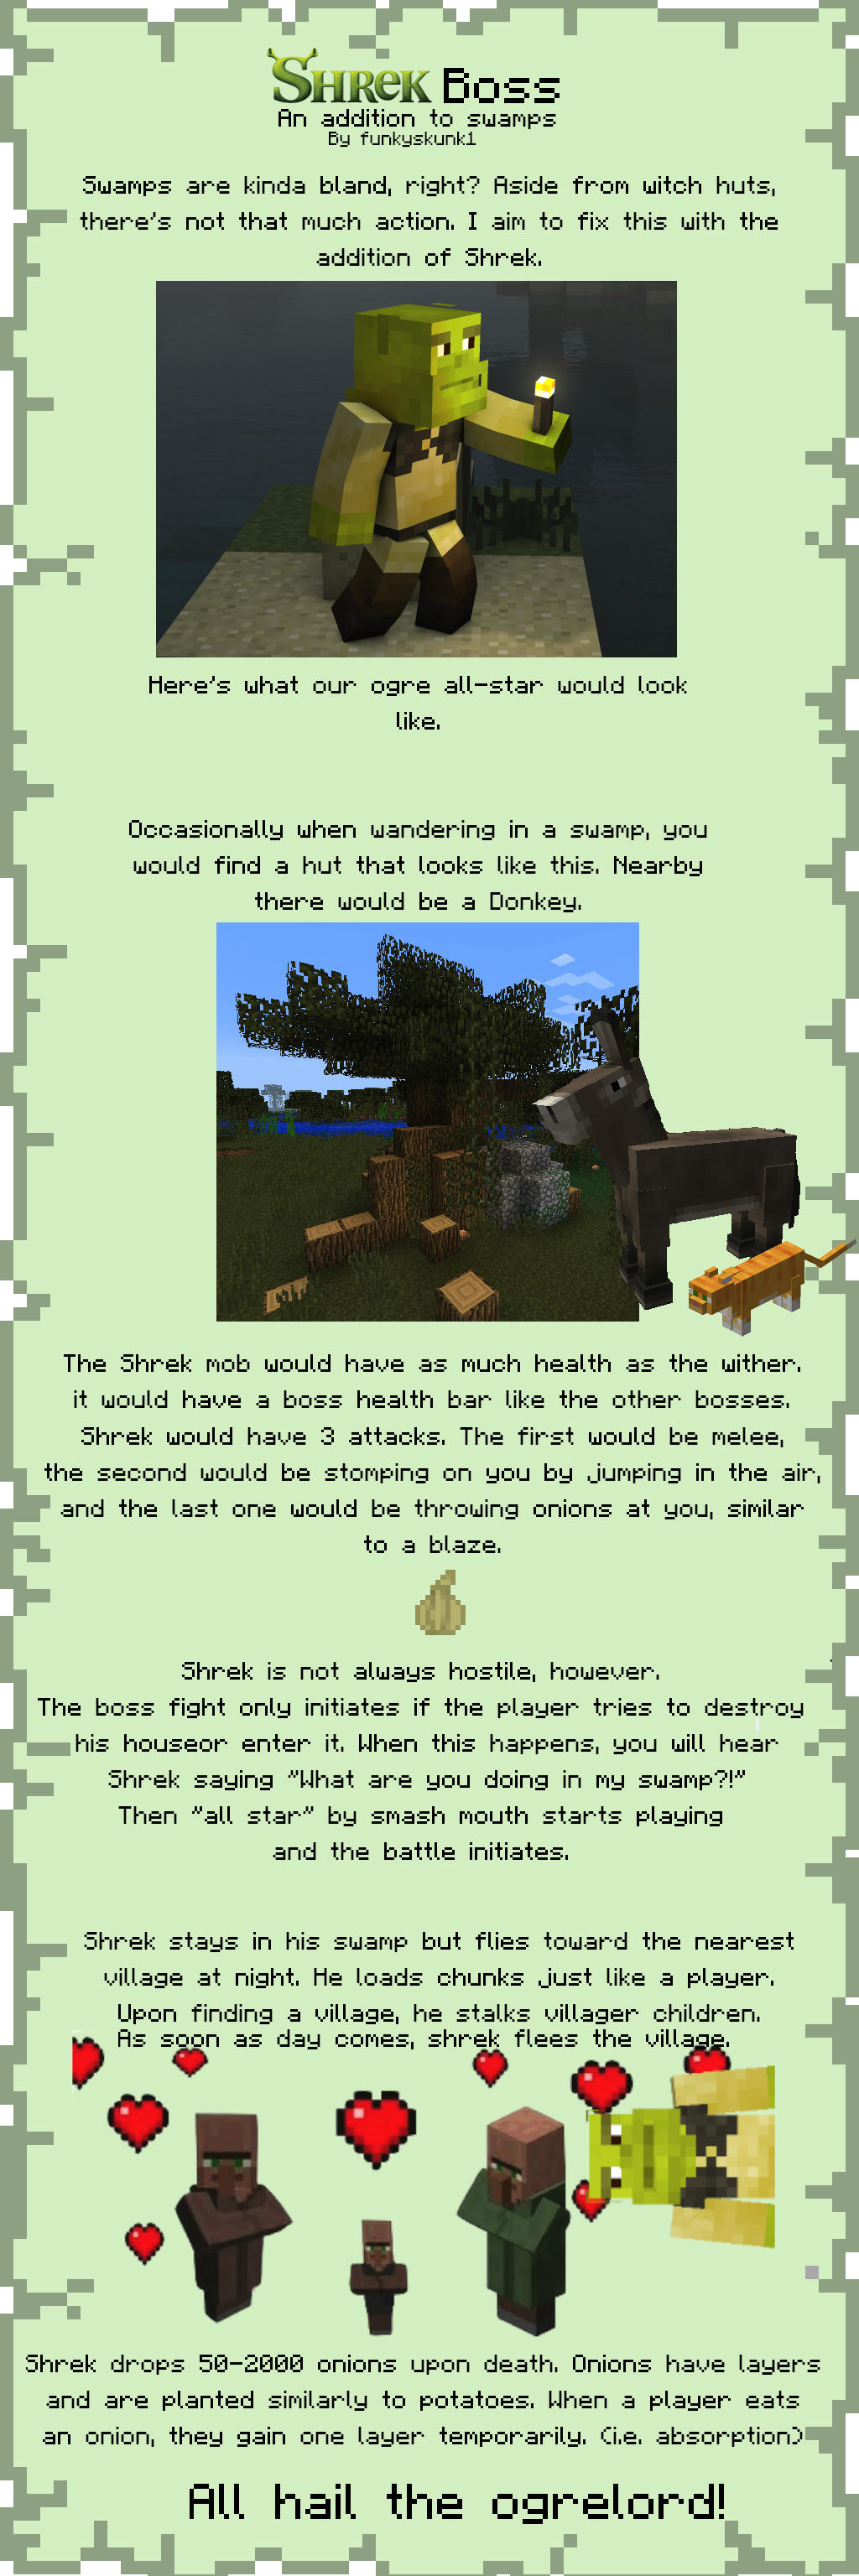 Any Ideas? - Discussion - Minecraft: Java Edition - Minecraft Forum -  Minecraft Forum